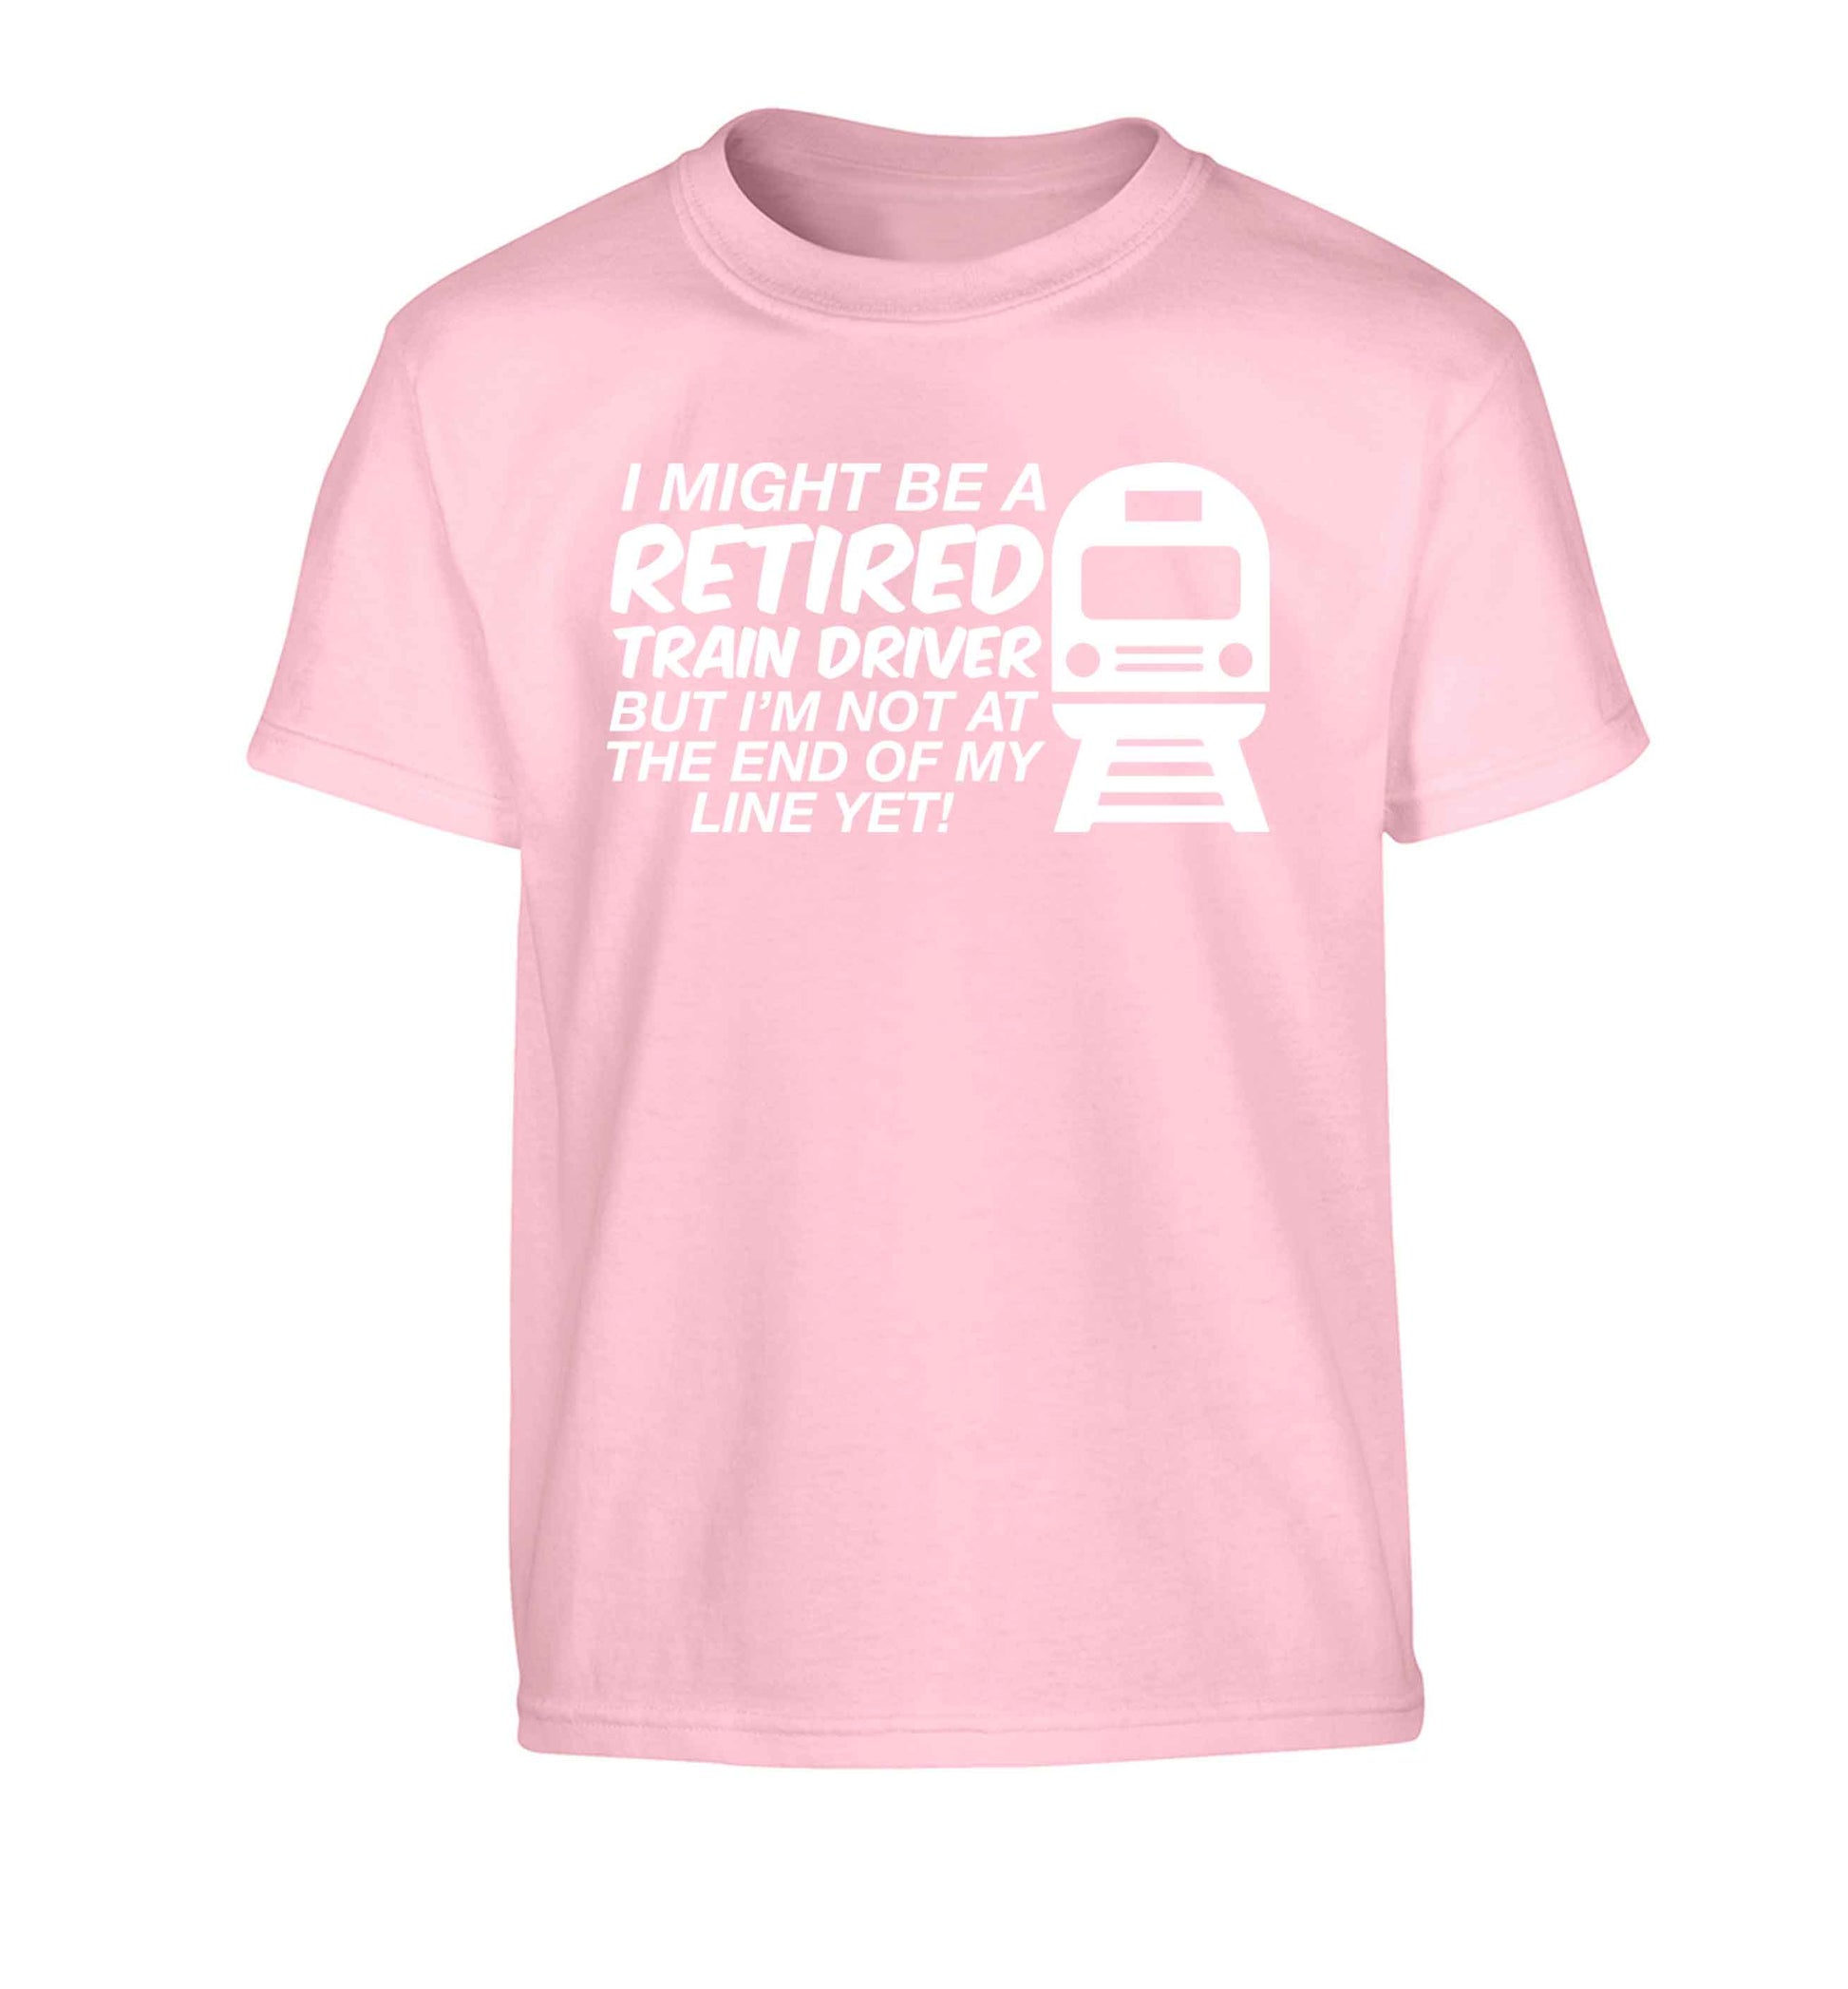 Retired train driver but I'm not at the end of my line yet Children's light pink Tshirt 12-13 Years